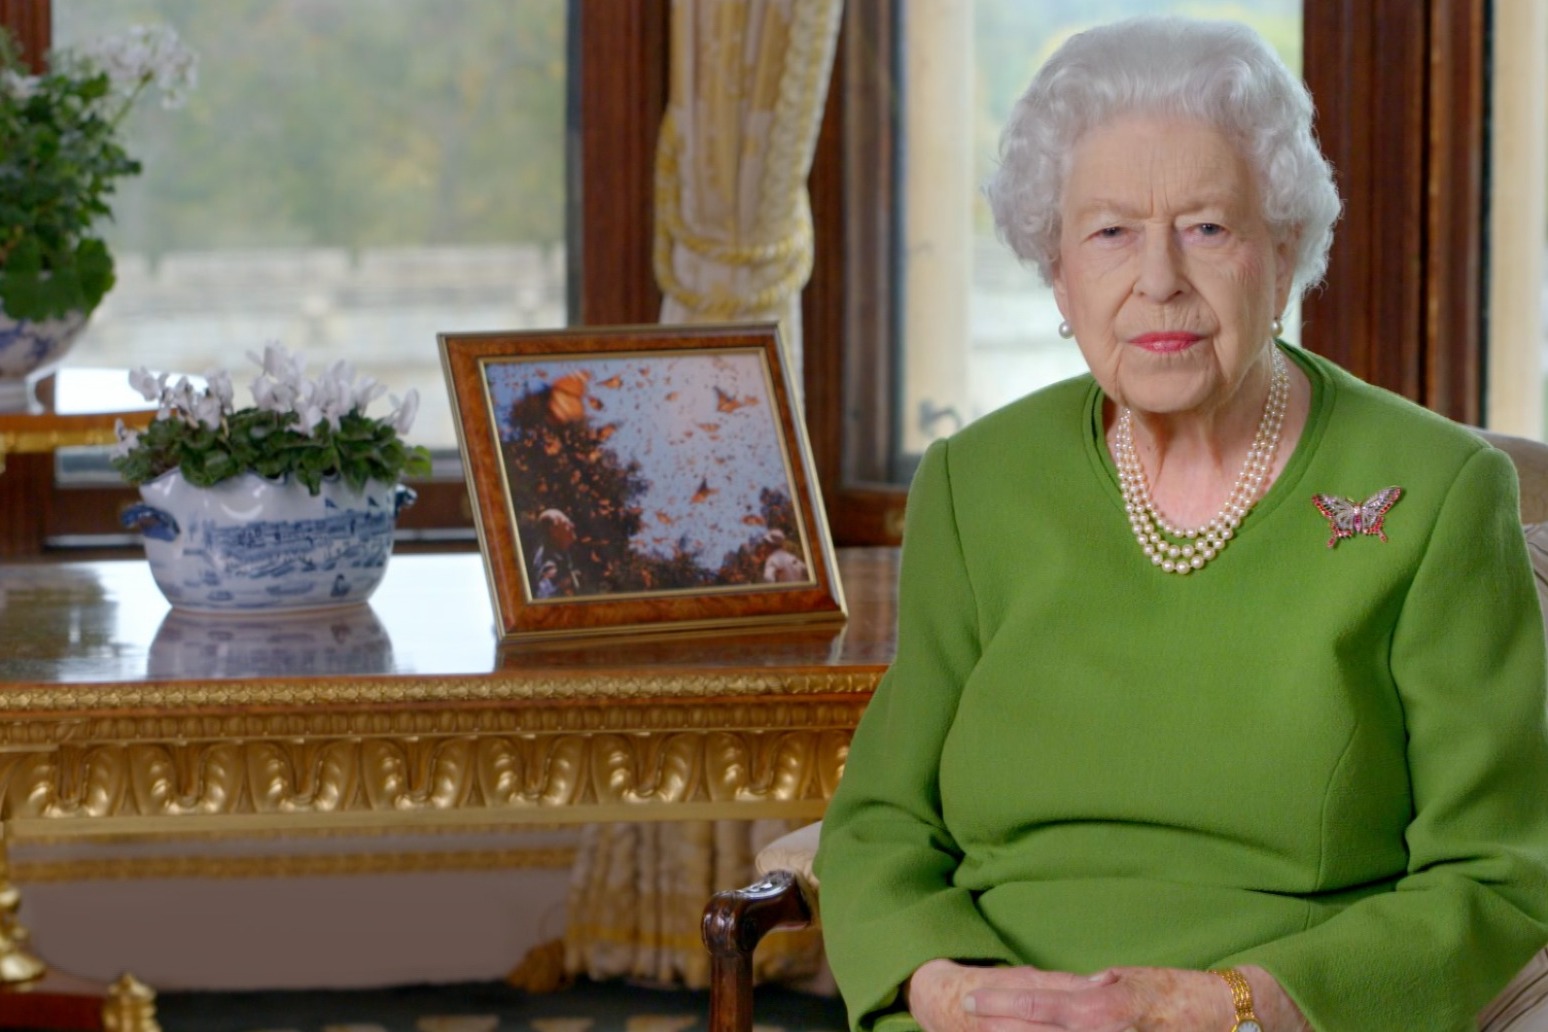 The Queen calls for world leaders to work together to tackle climate change 